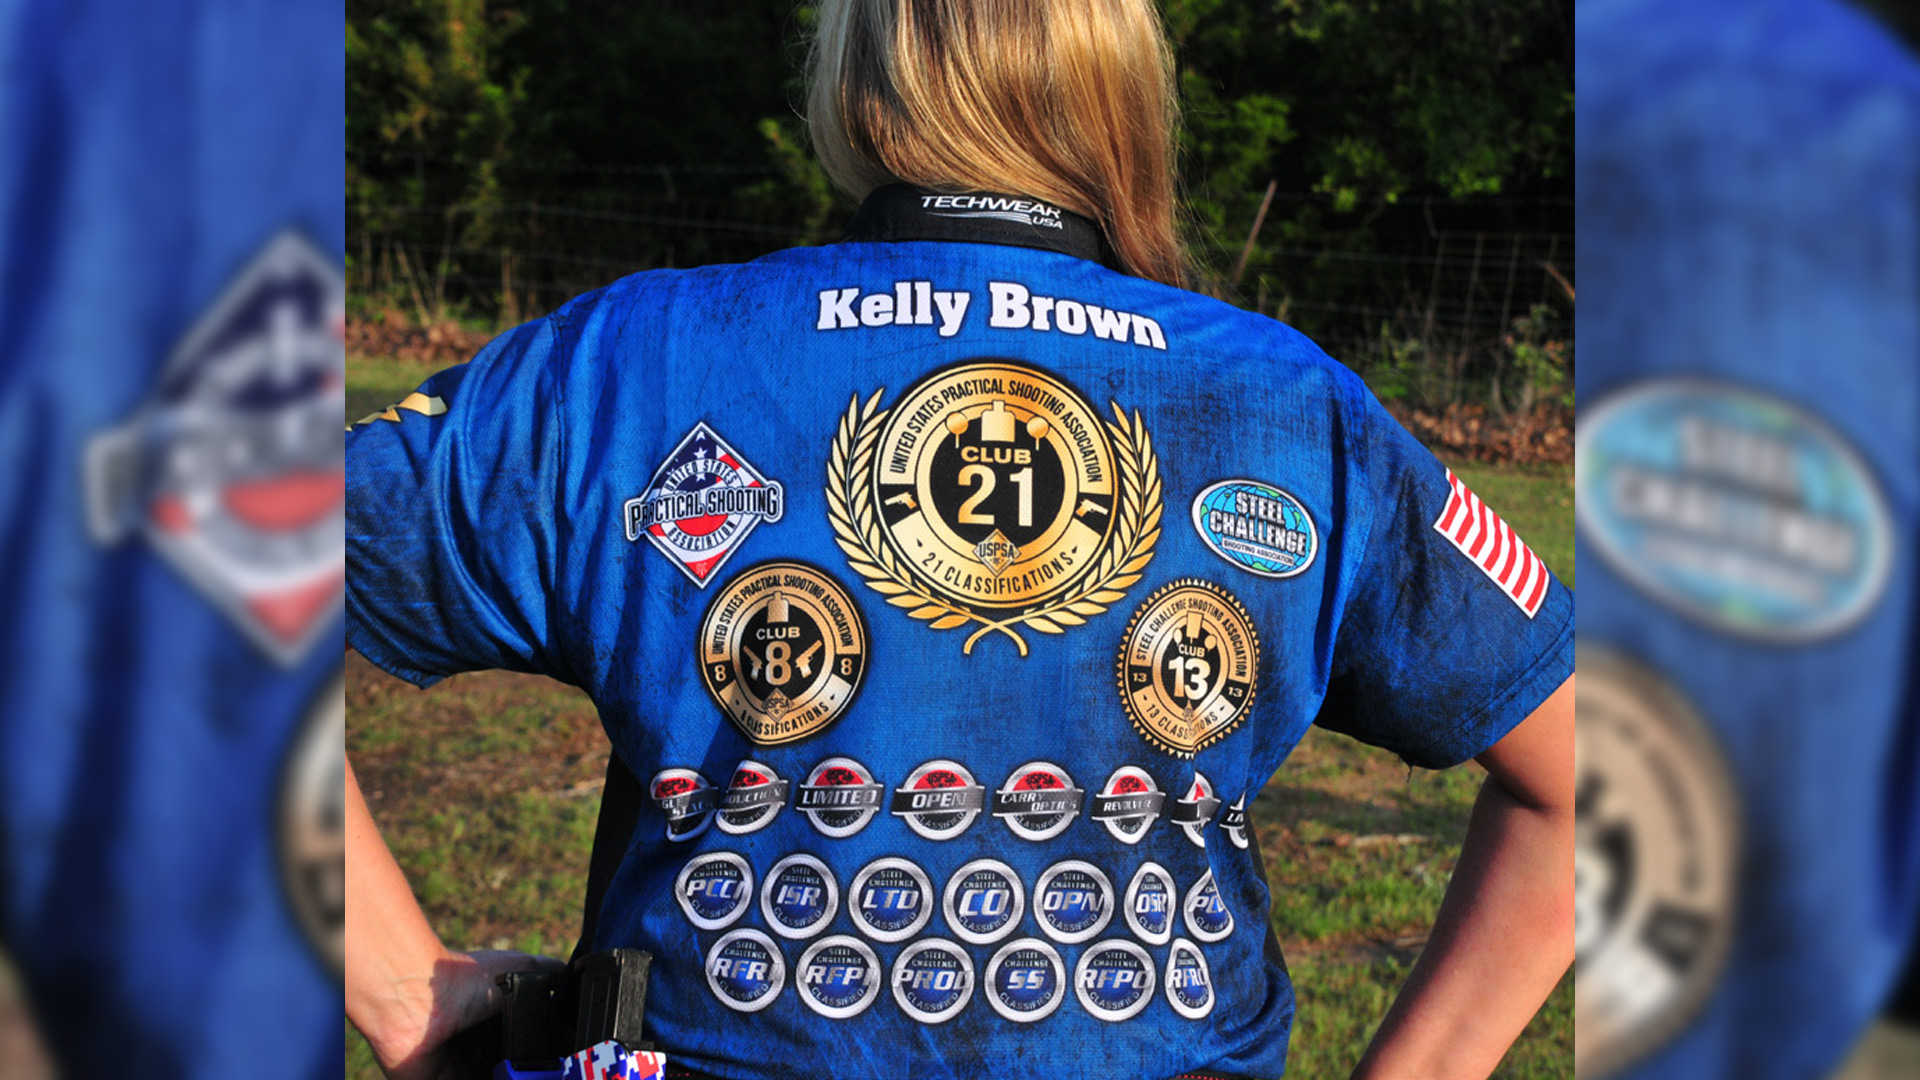 Kelly Brown jersey